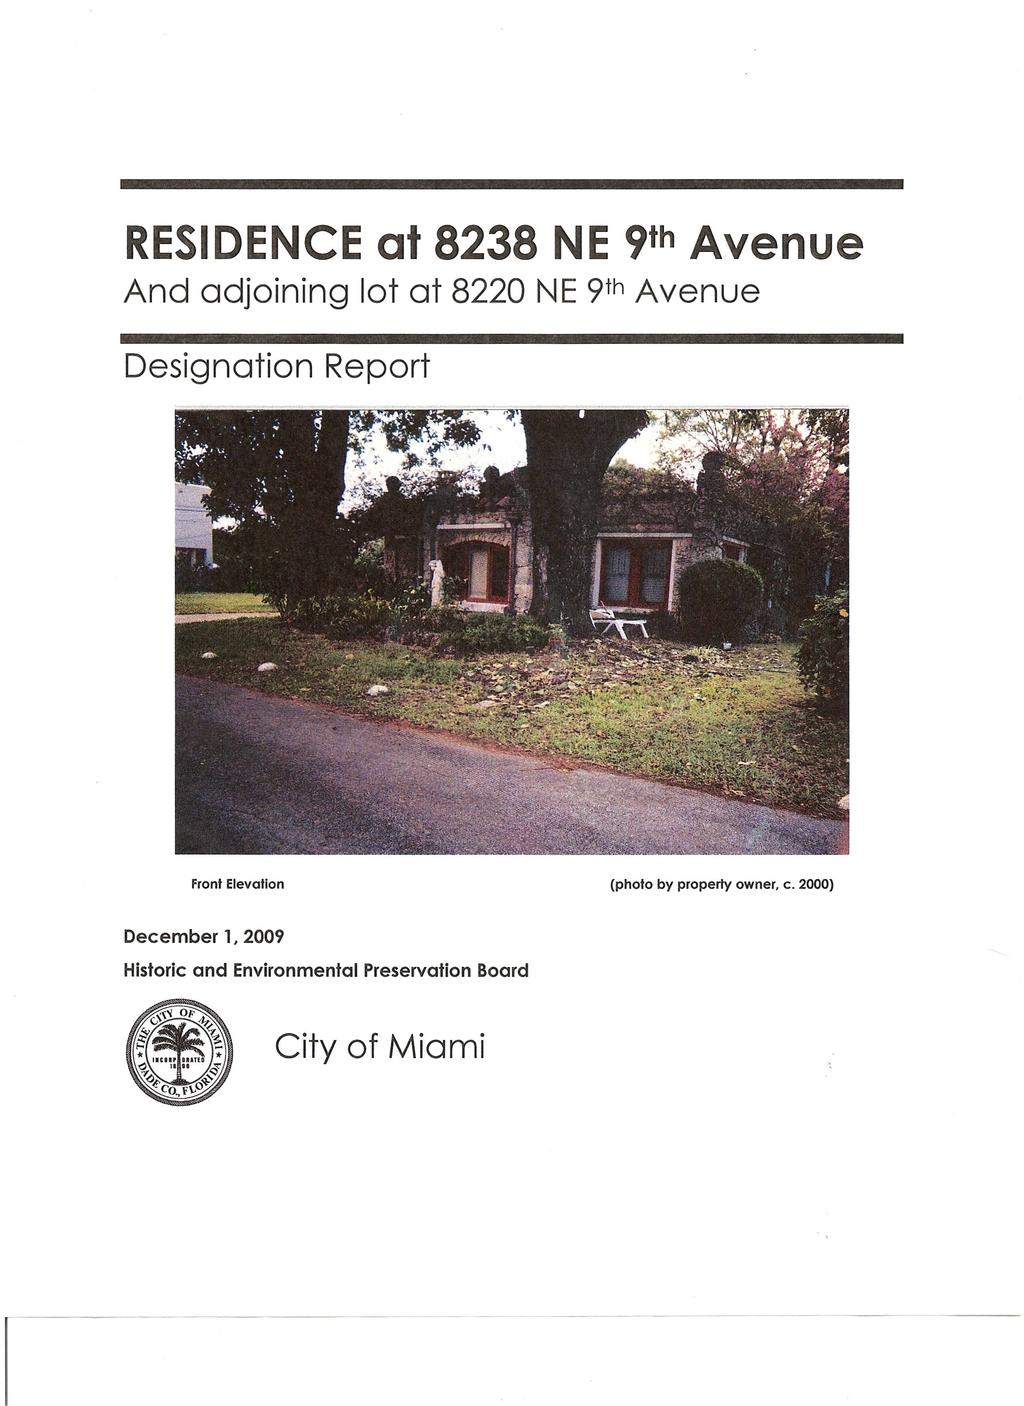 RESIDENCE at 8238 NE 9 th Avenue And adjoining lot at 8220 NE9 th Avenue